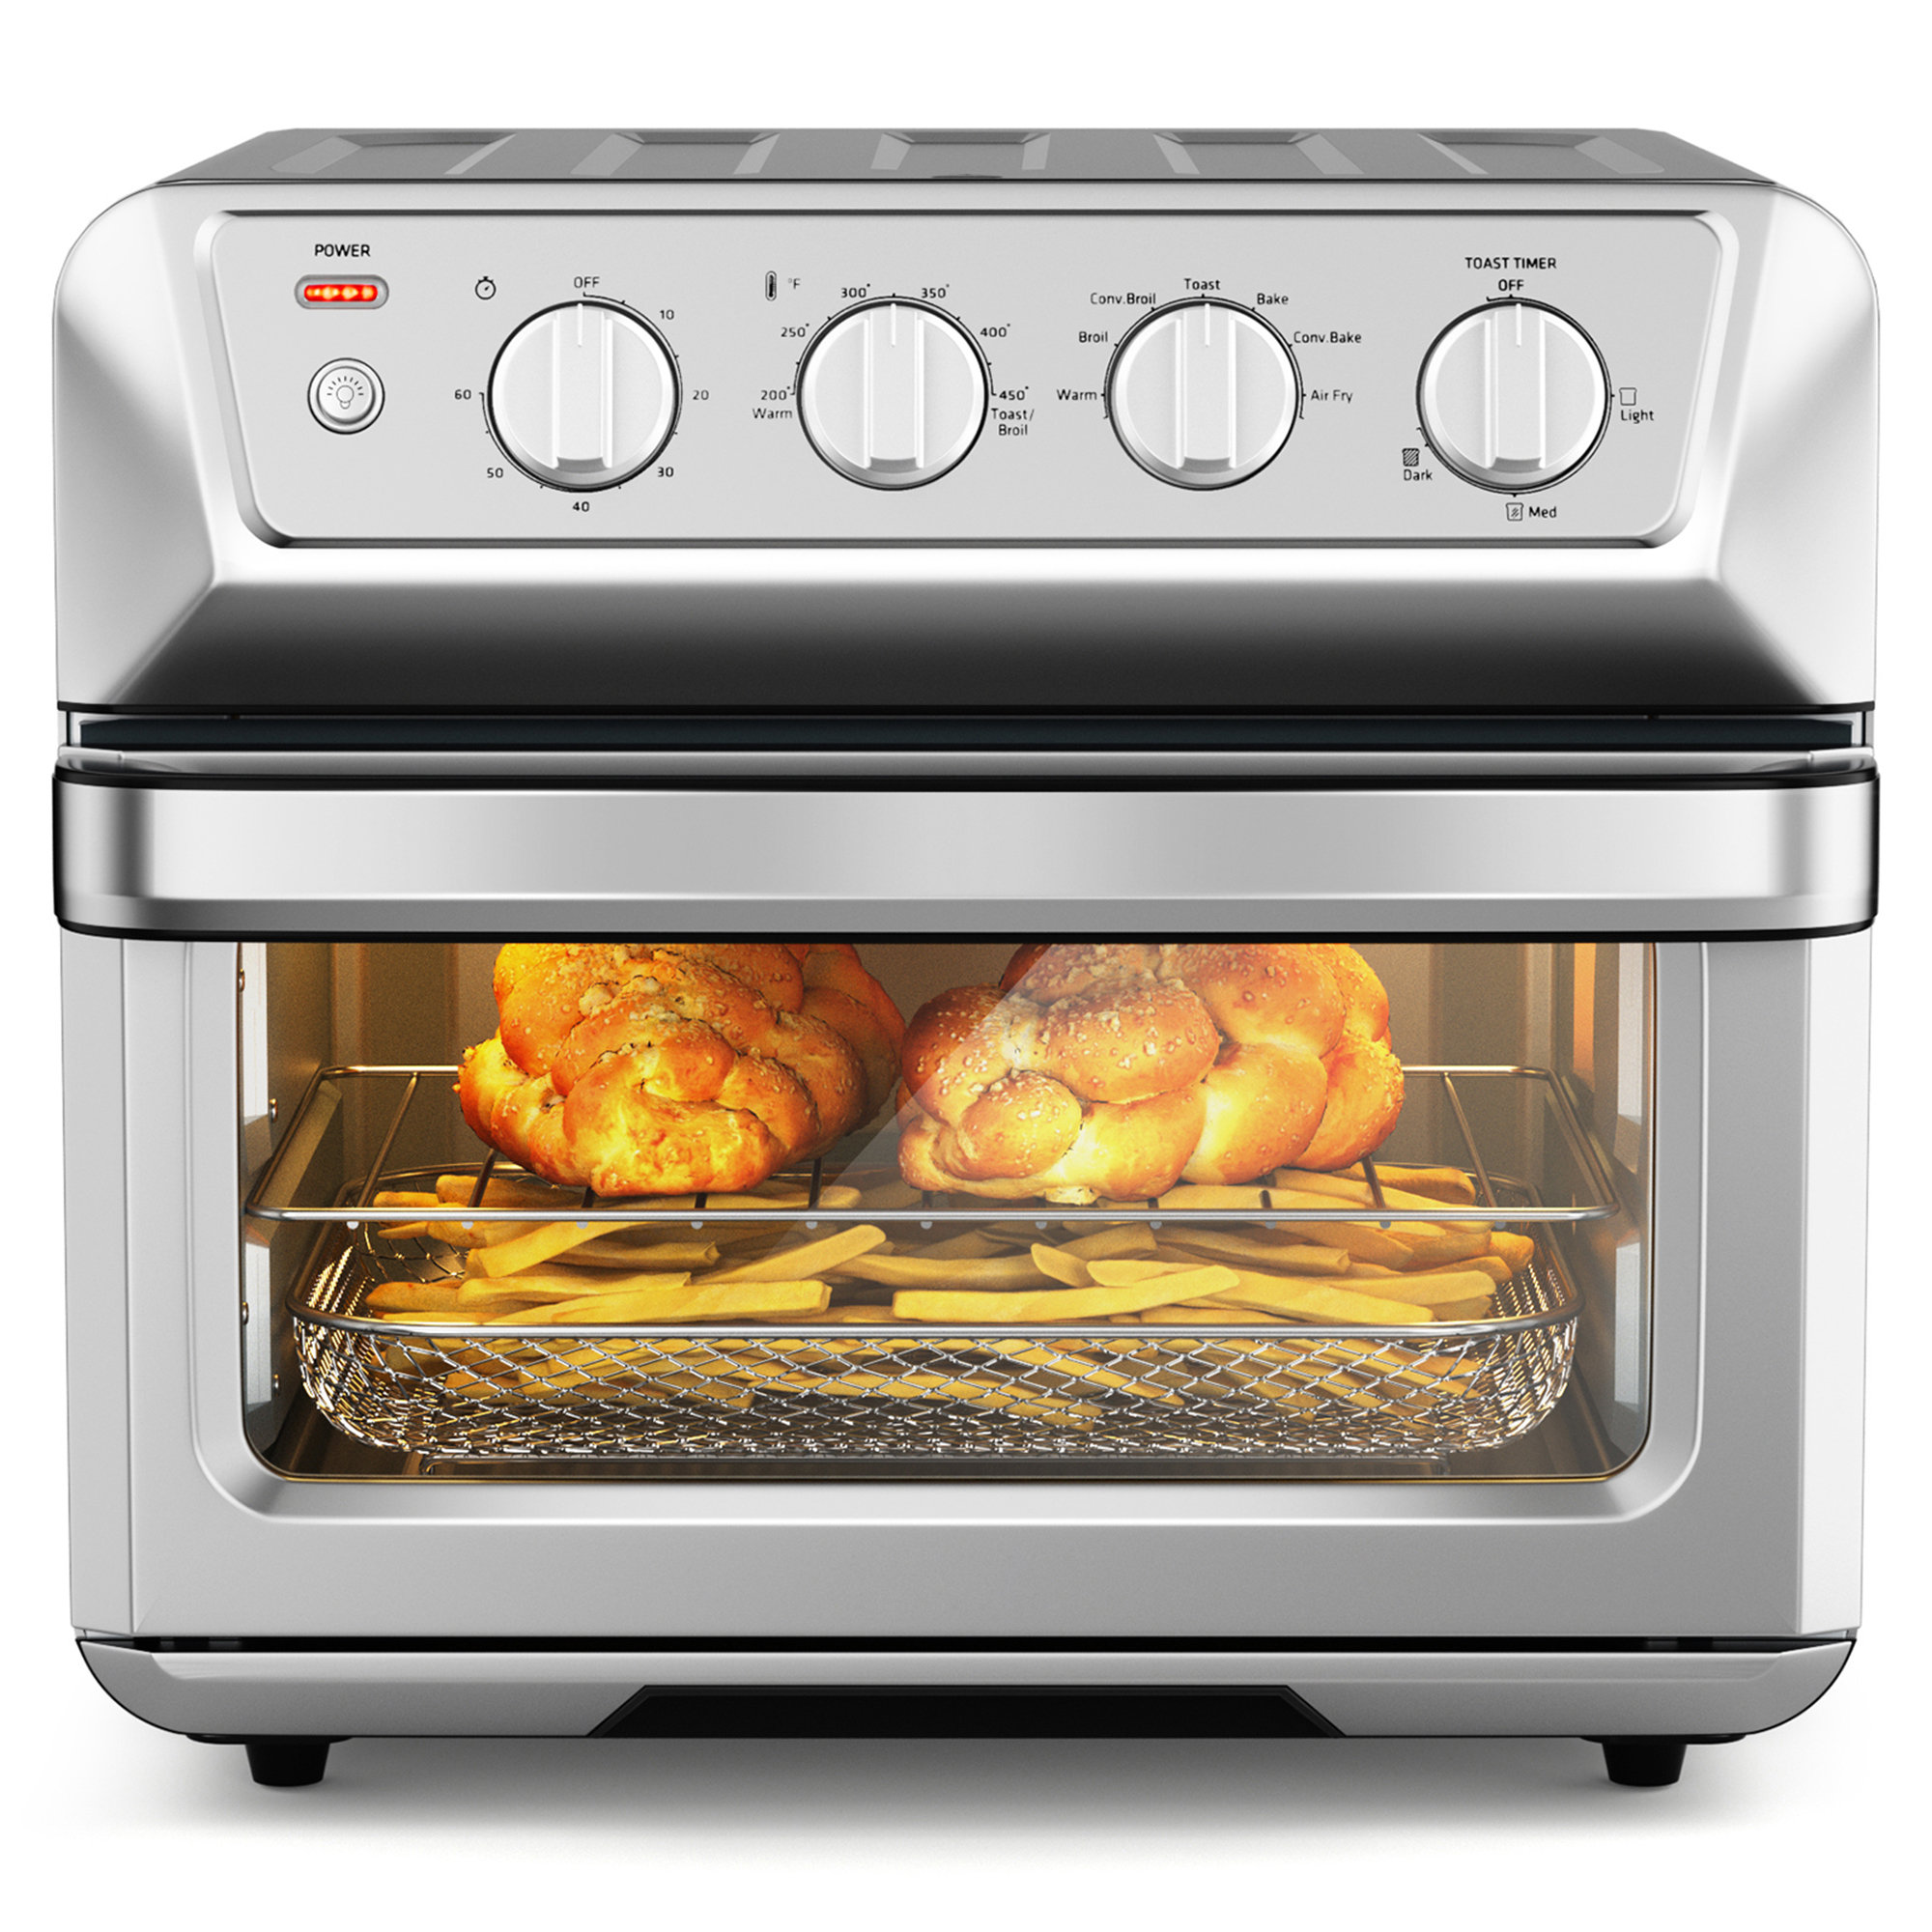 COMFEE' 12-in-1 Toaster Oven Air Fryer Combo Rotisserie